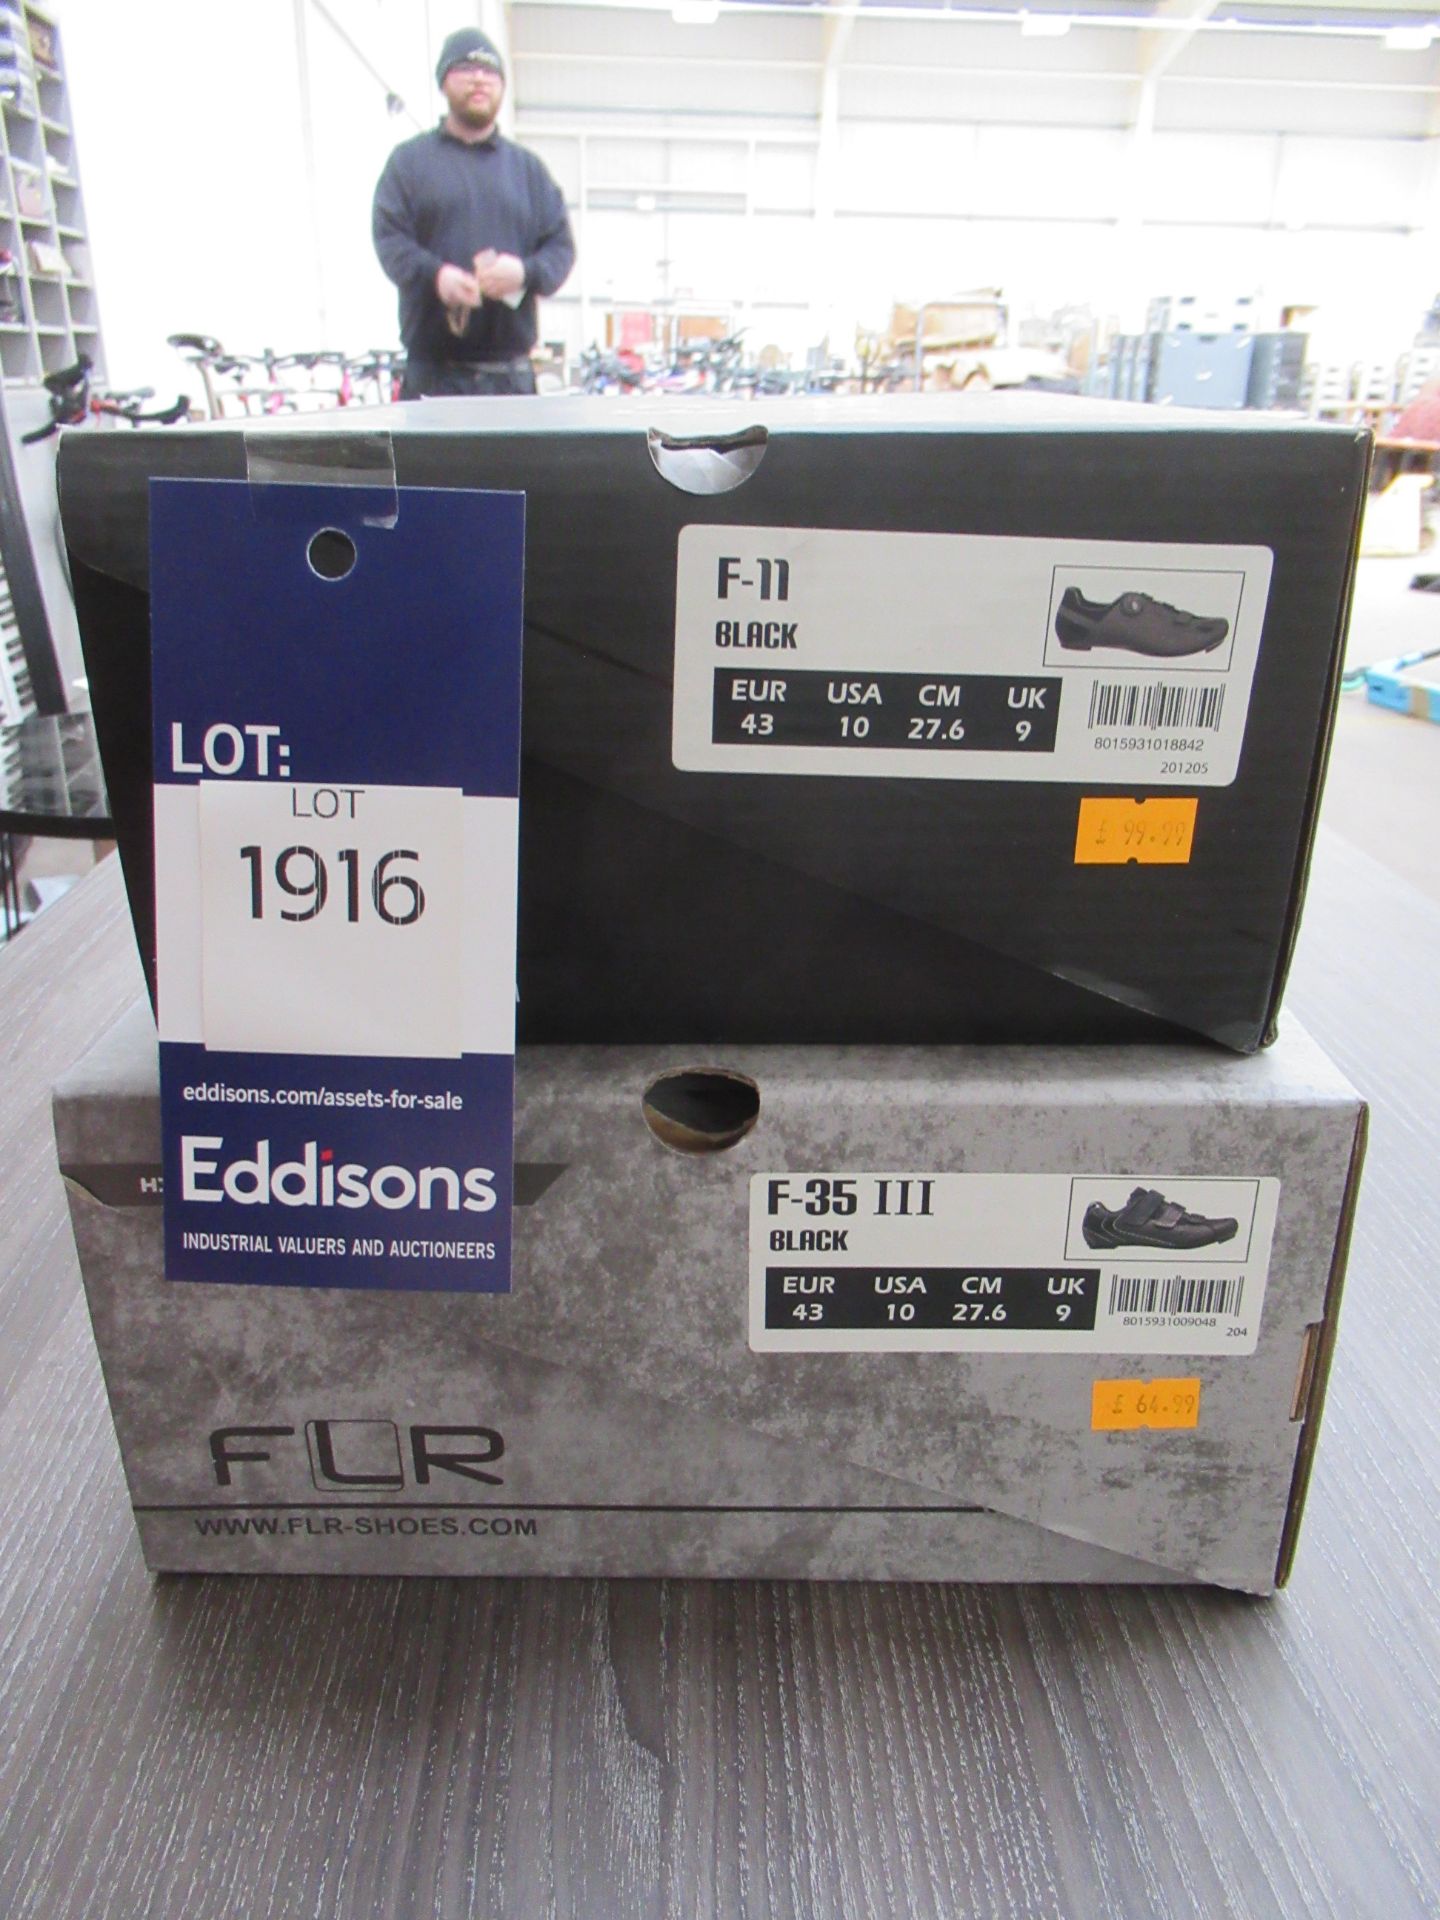 2 x Pairs of FLR cycling shoes - 1 x F-11 boxed EU size 43 (RRP£99.99) and 1 x F-35 III boxed EU siz